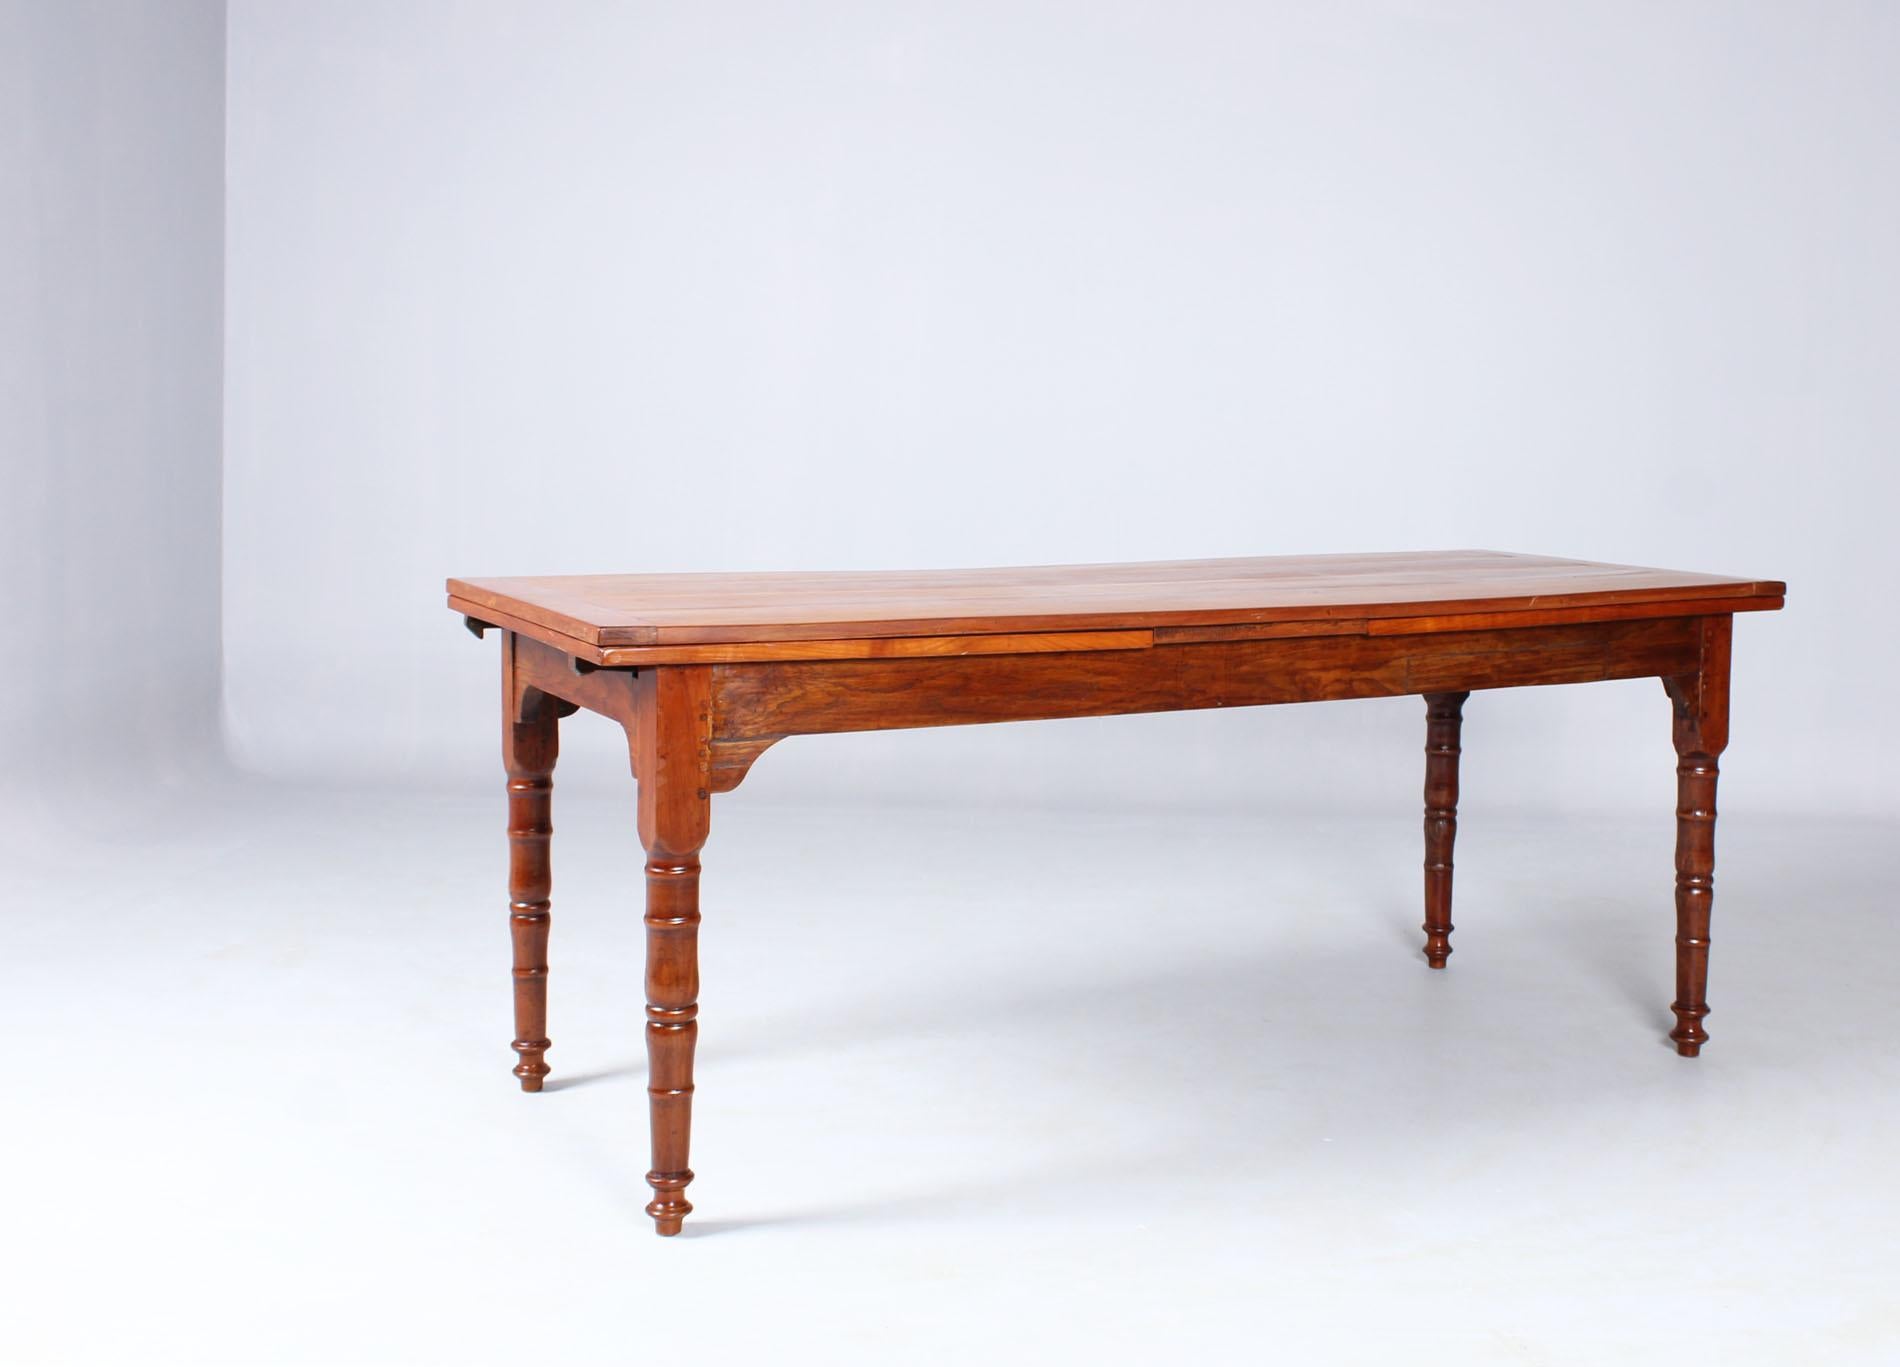 Louis Philippe 19th Century French Farmhouse or Country House Table, Solid Cherry, circa 1850